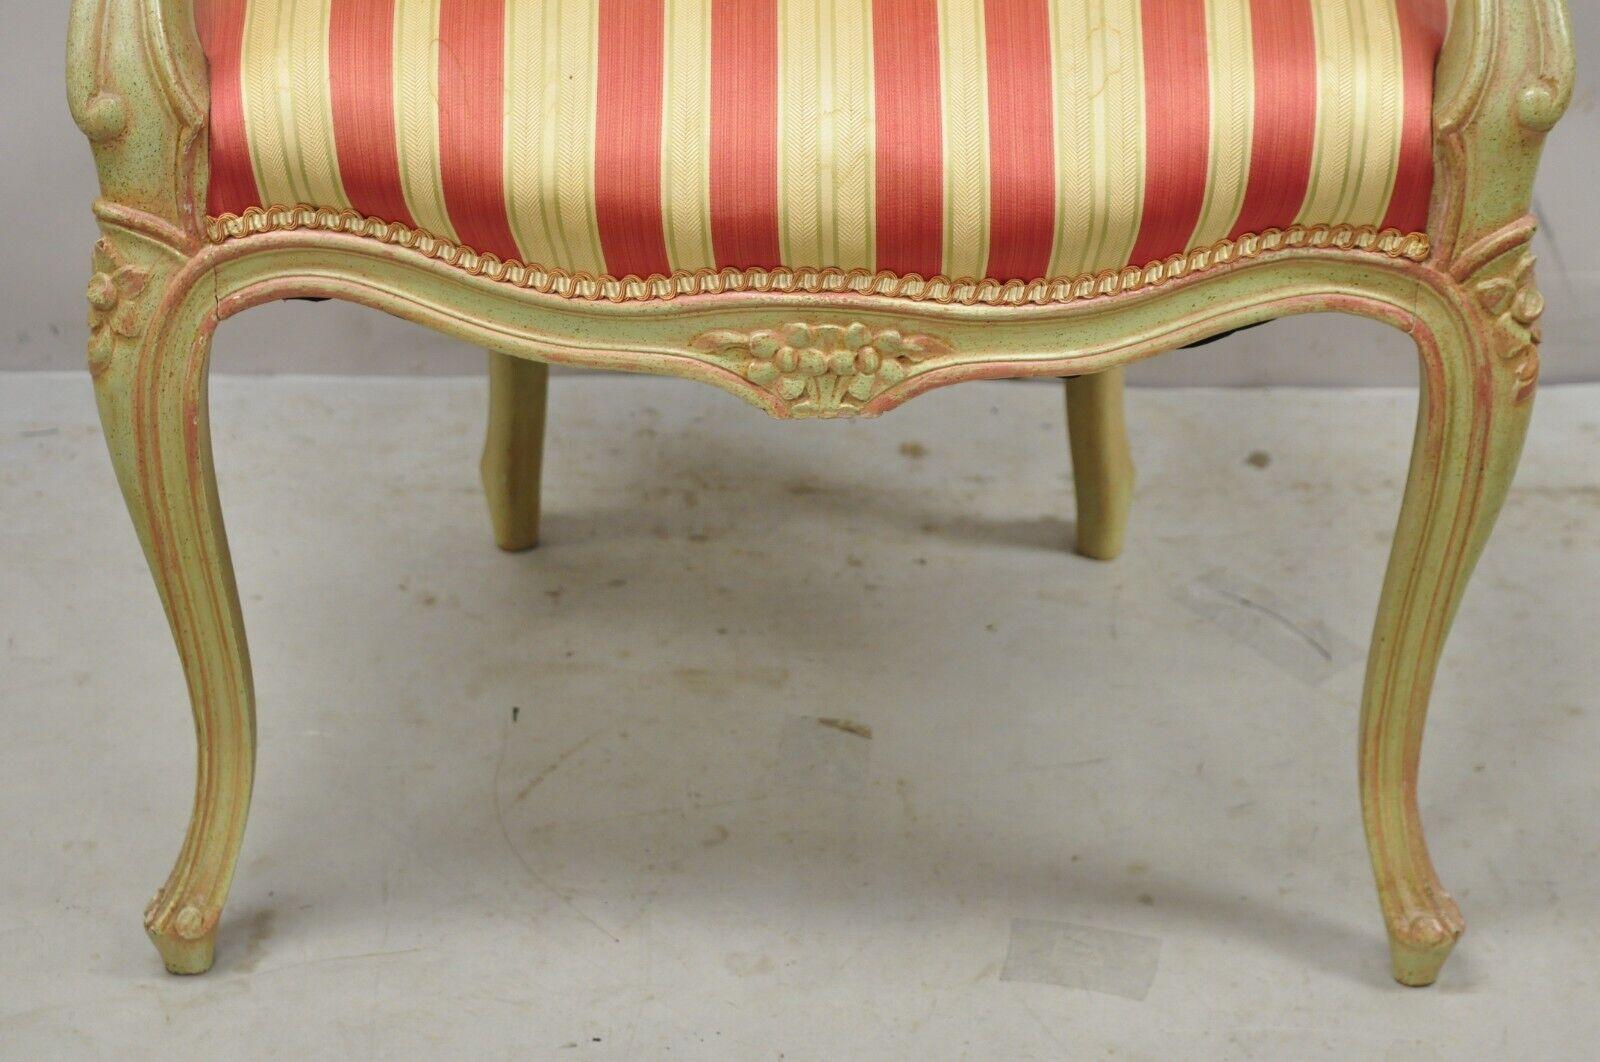 20th Century Vtg French Louis XV Style Green & Pink Painted Arm Chair Fauteuil Striped Fabric For Sale